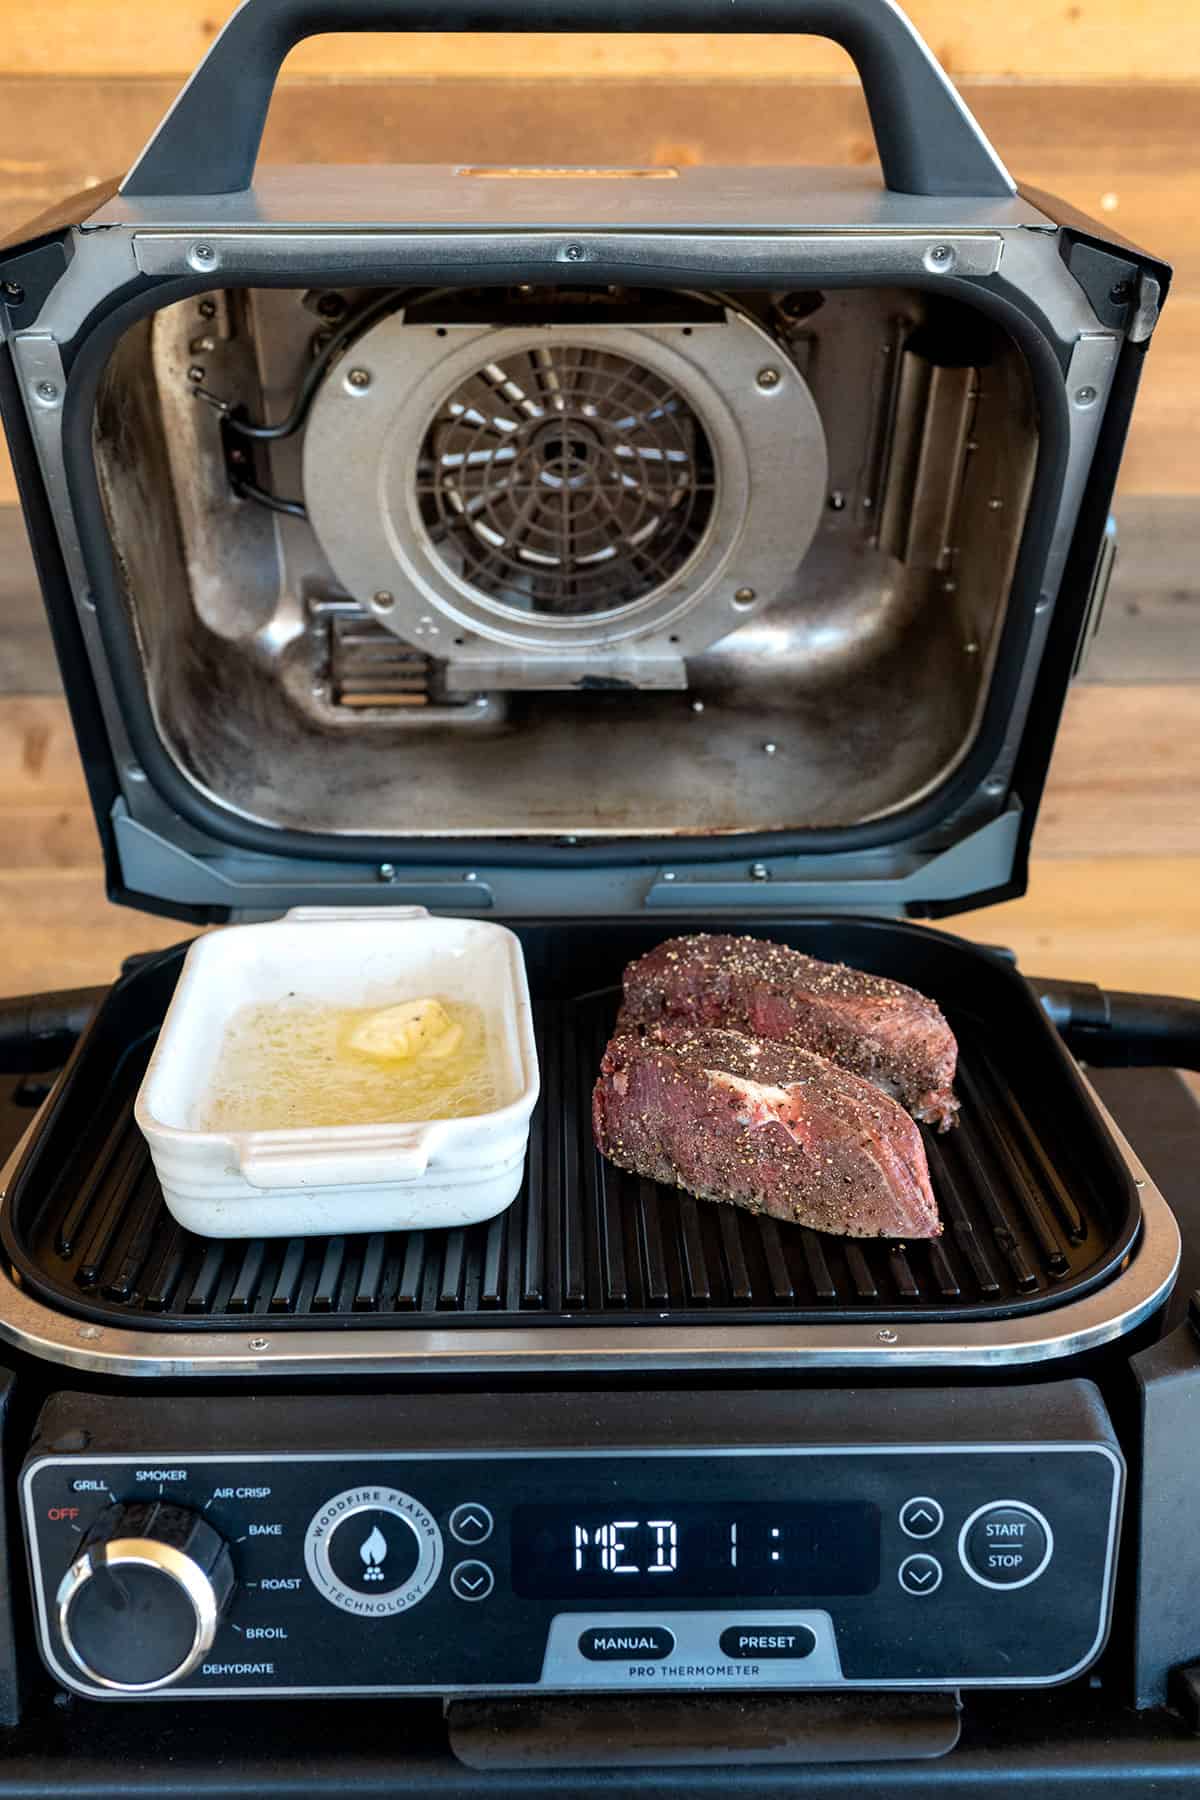 2 filet steaks on grill with small baking dish with melted butter on ninja grill.